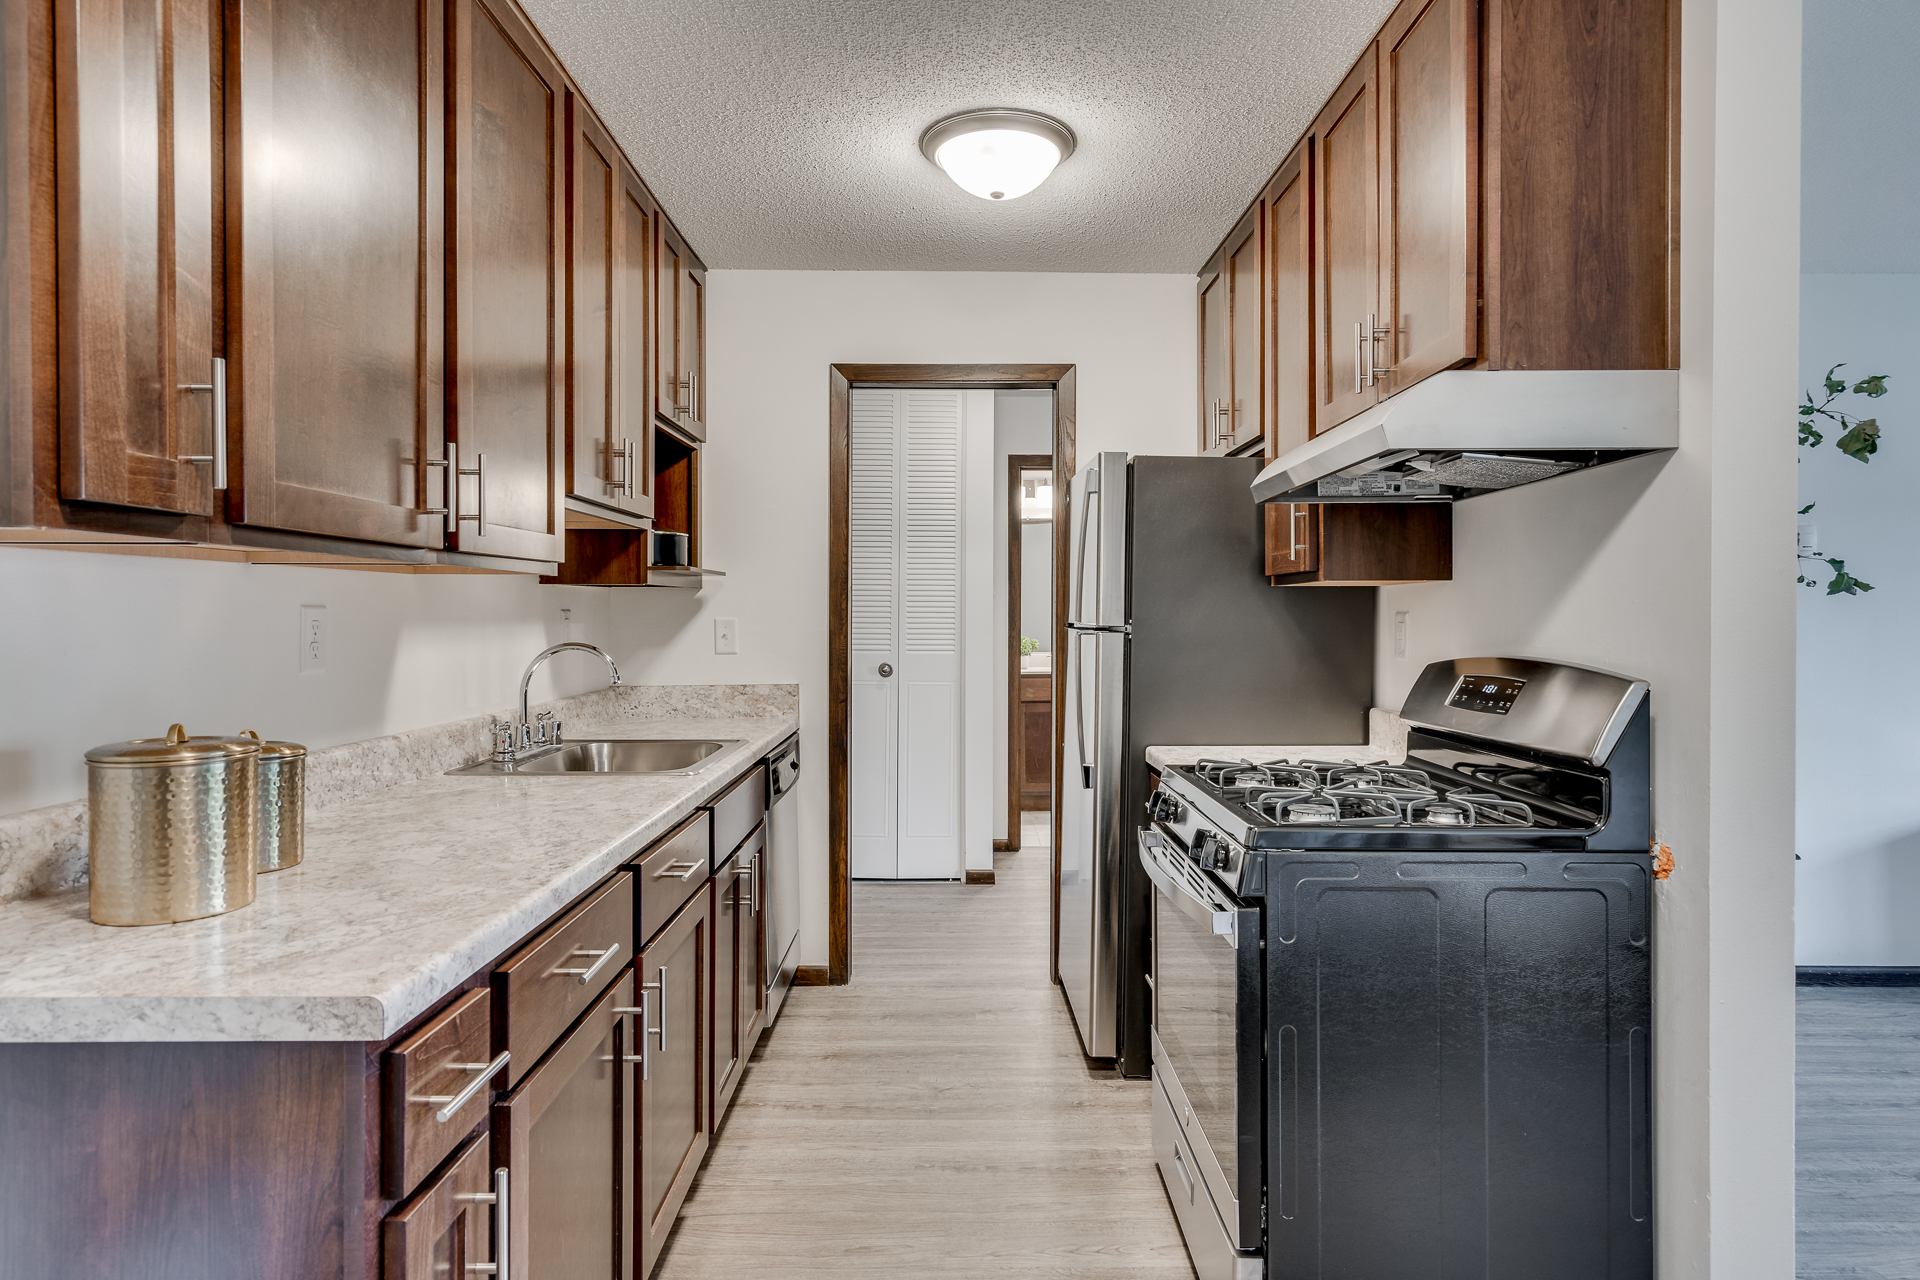 Gas Stoves In Kitchens At Sumter Green Apartments In Crystal, MN